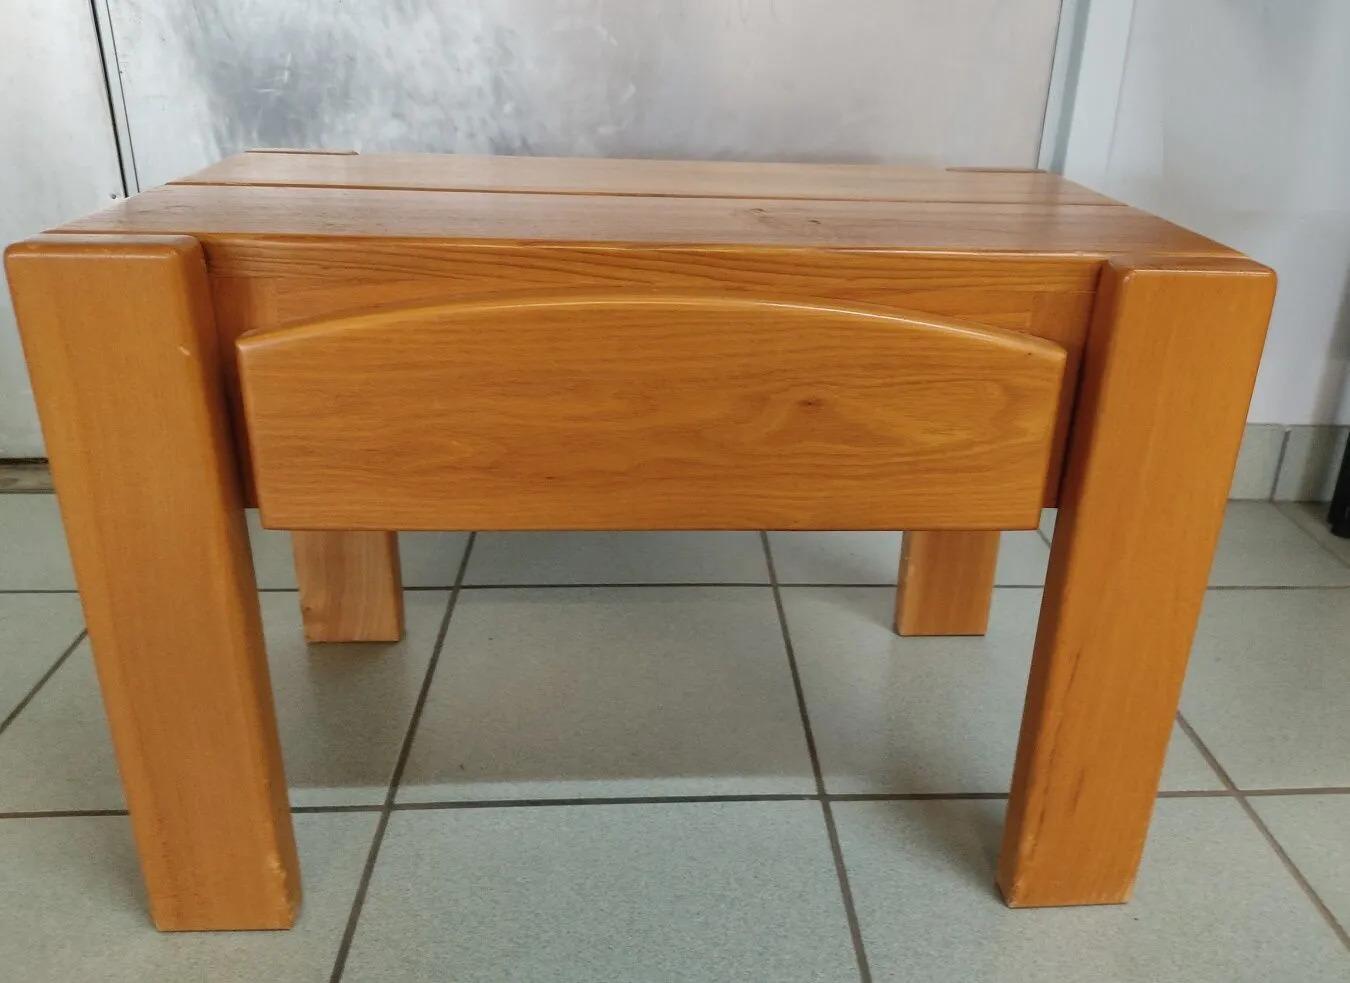 Maison regain 2 bedside tables in solid elm opening with a front drawer. Laying on four rectangular legs. Around 1960.
Pierre Chapo style
Scratches.
price is for one , two are available